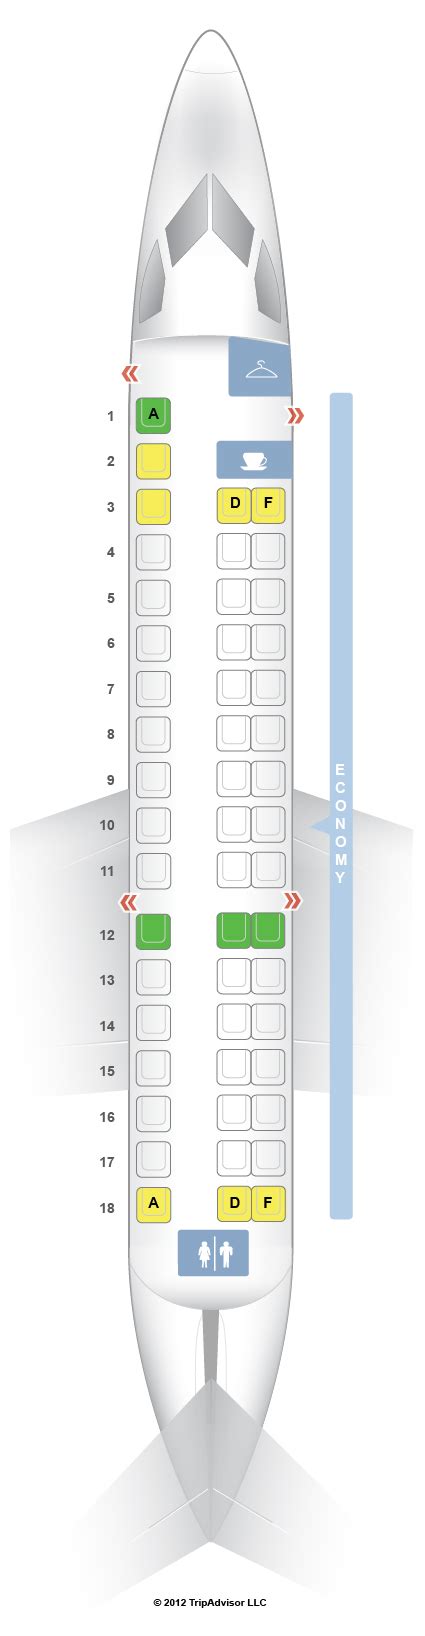 Seat 24 B is a standard Economy Class seat located in the last row of the aircraft. The proximity to the lavatory and galley may be bothersome. 24 C: None: No Power: Seat 24 C is a standard Economy Class seat located in the last row of the aircraft. The proximity to the lavatory and galley may be bothersome. 24 D: None: No Power. 